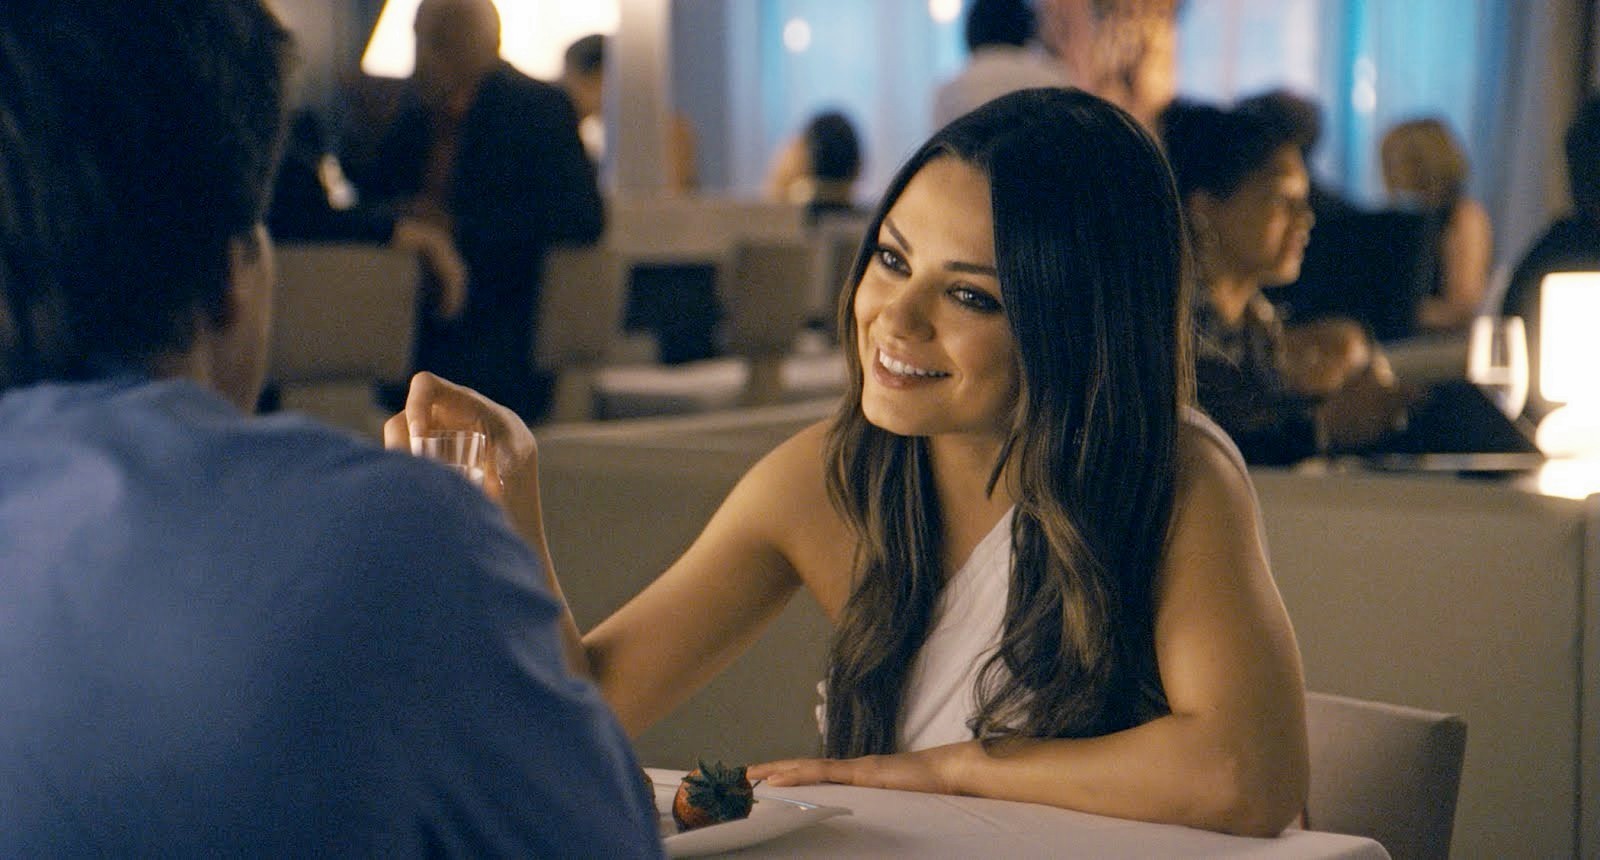 Mila Kunis stars as Lori in Universal Pictures' Ted (2012)